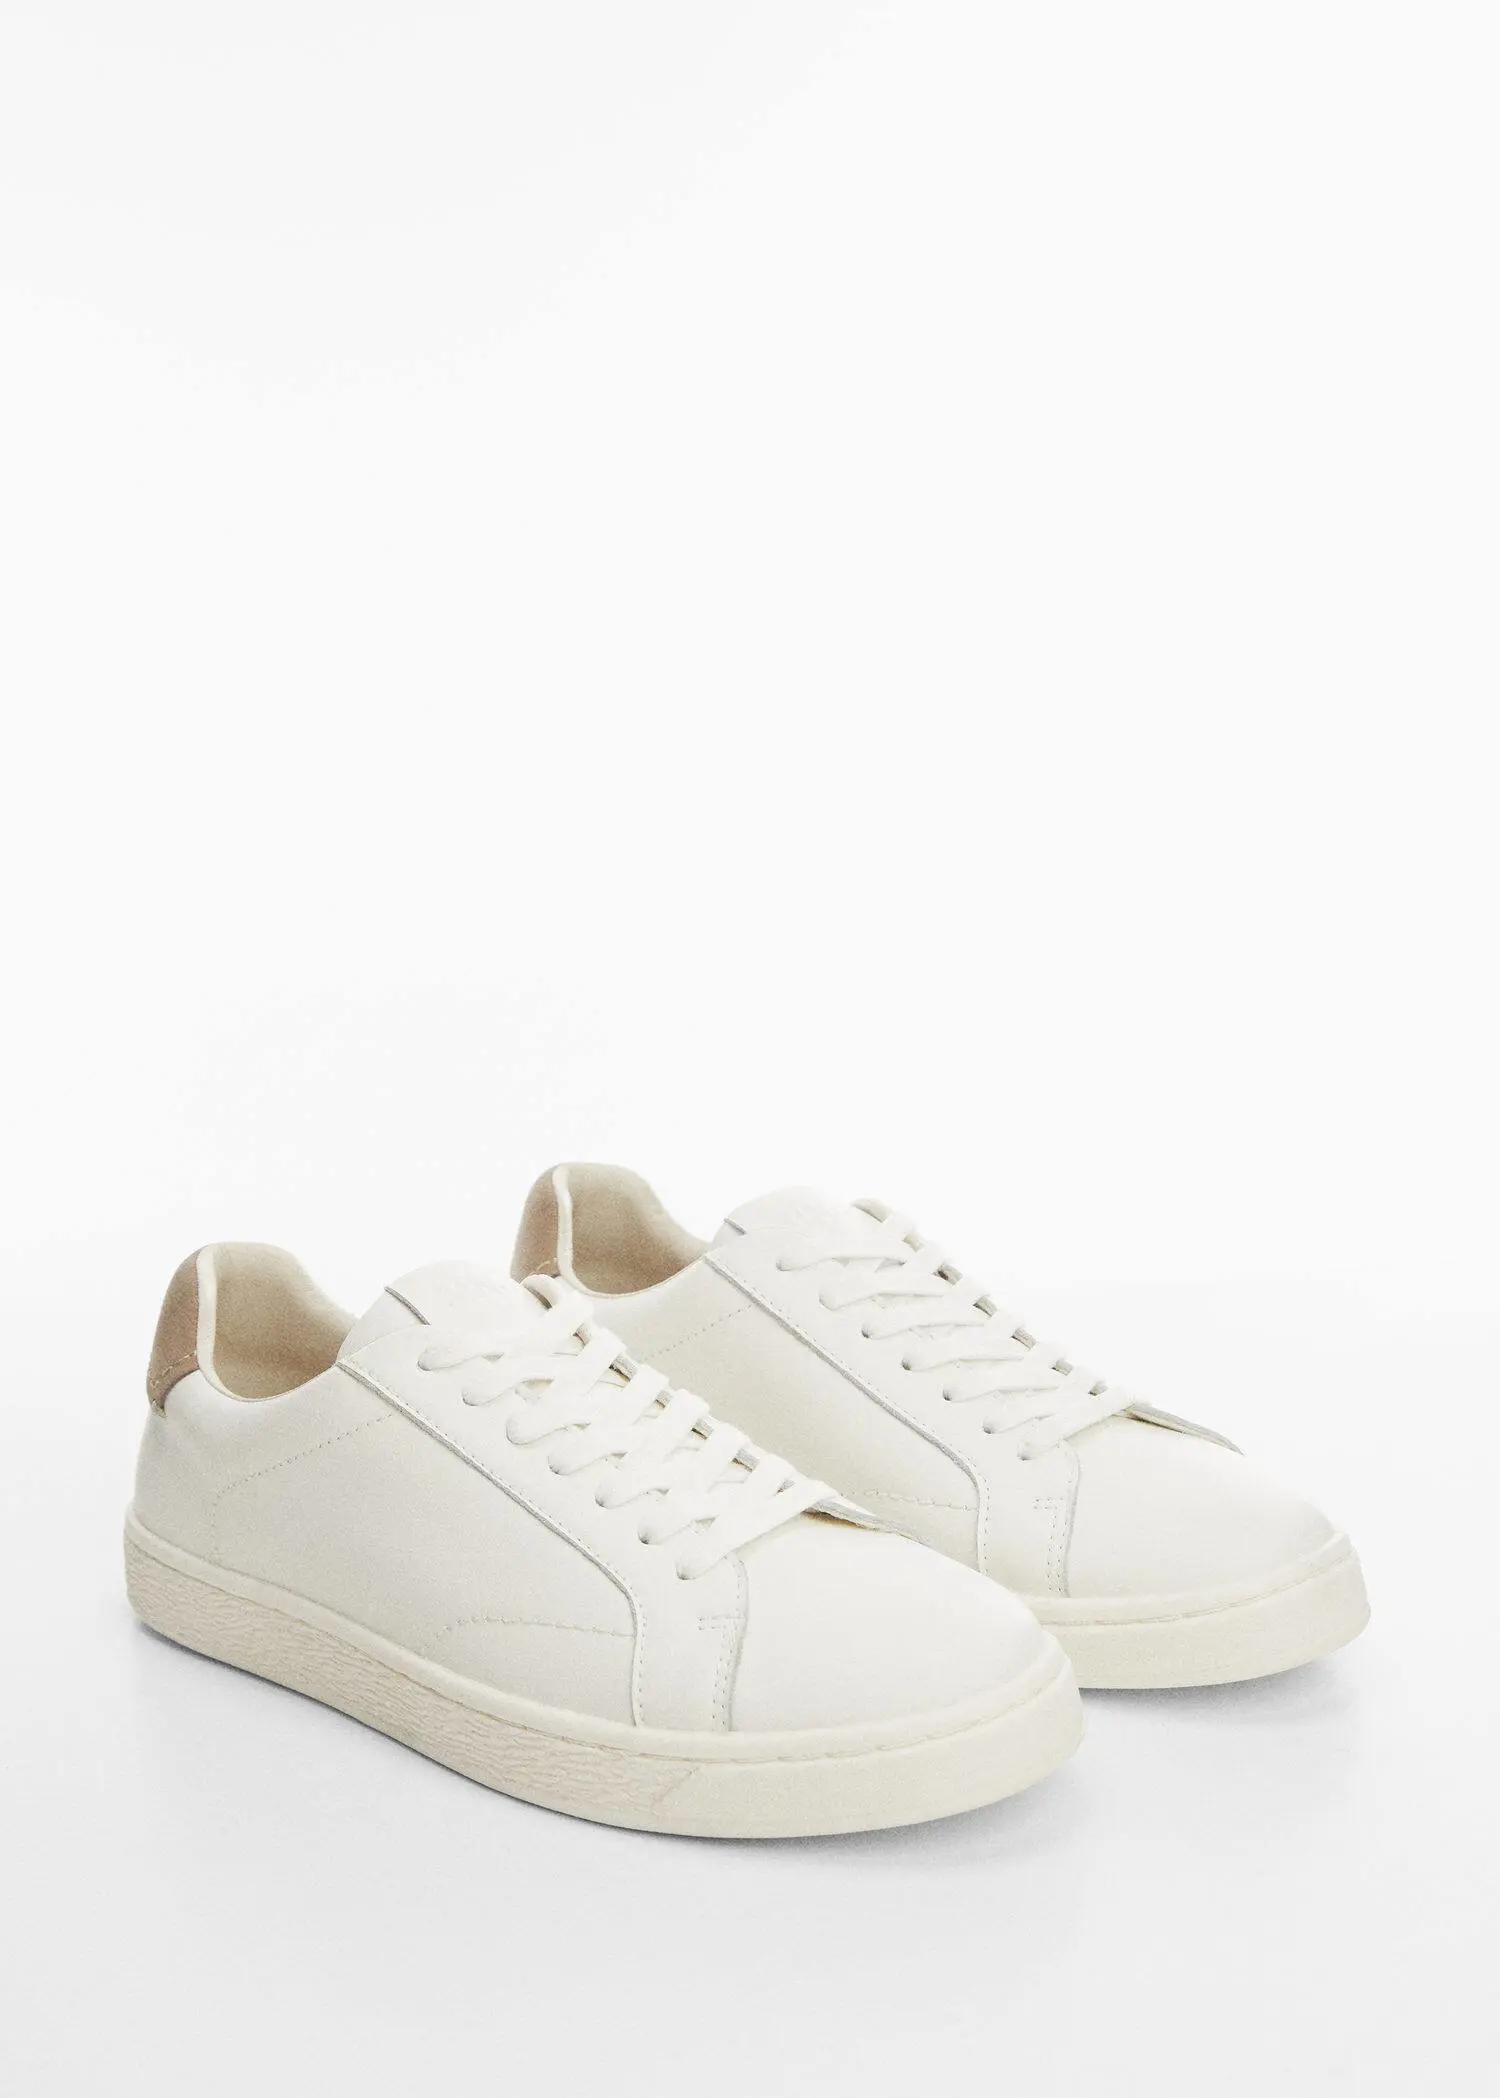 Mango Contrasting panel leather sneakers. 3